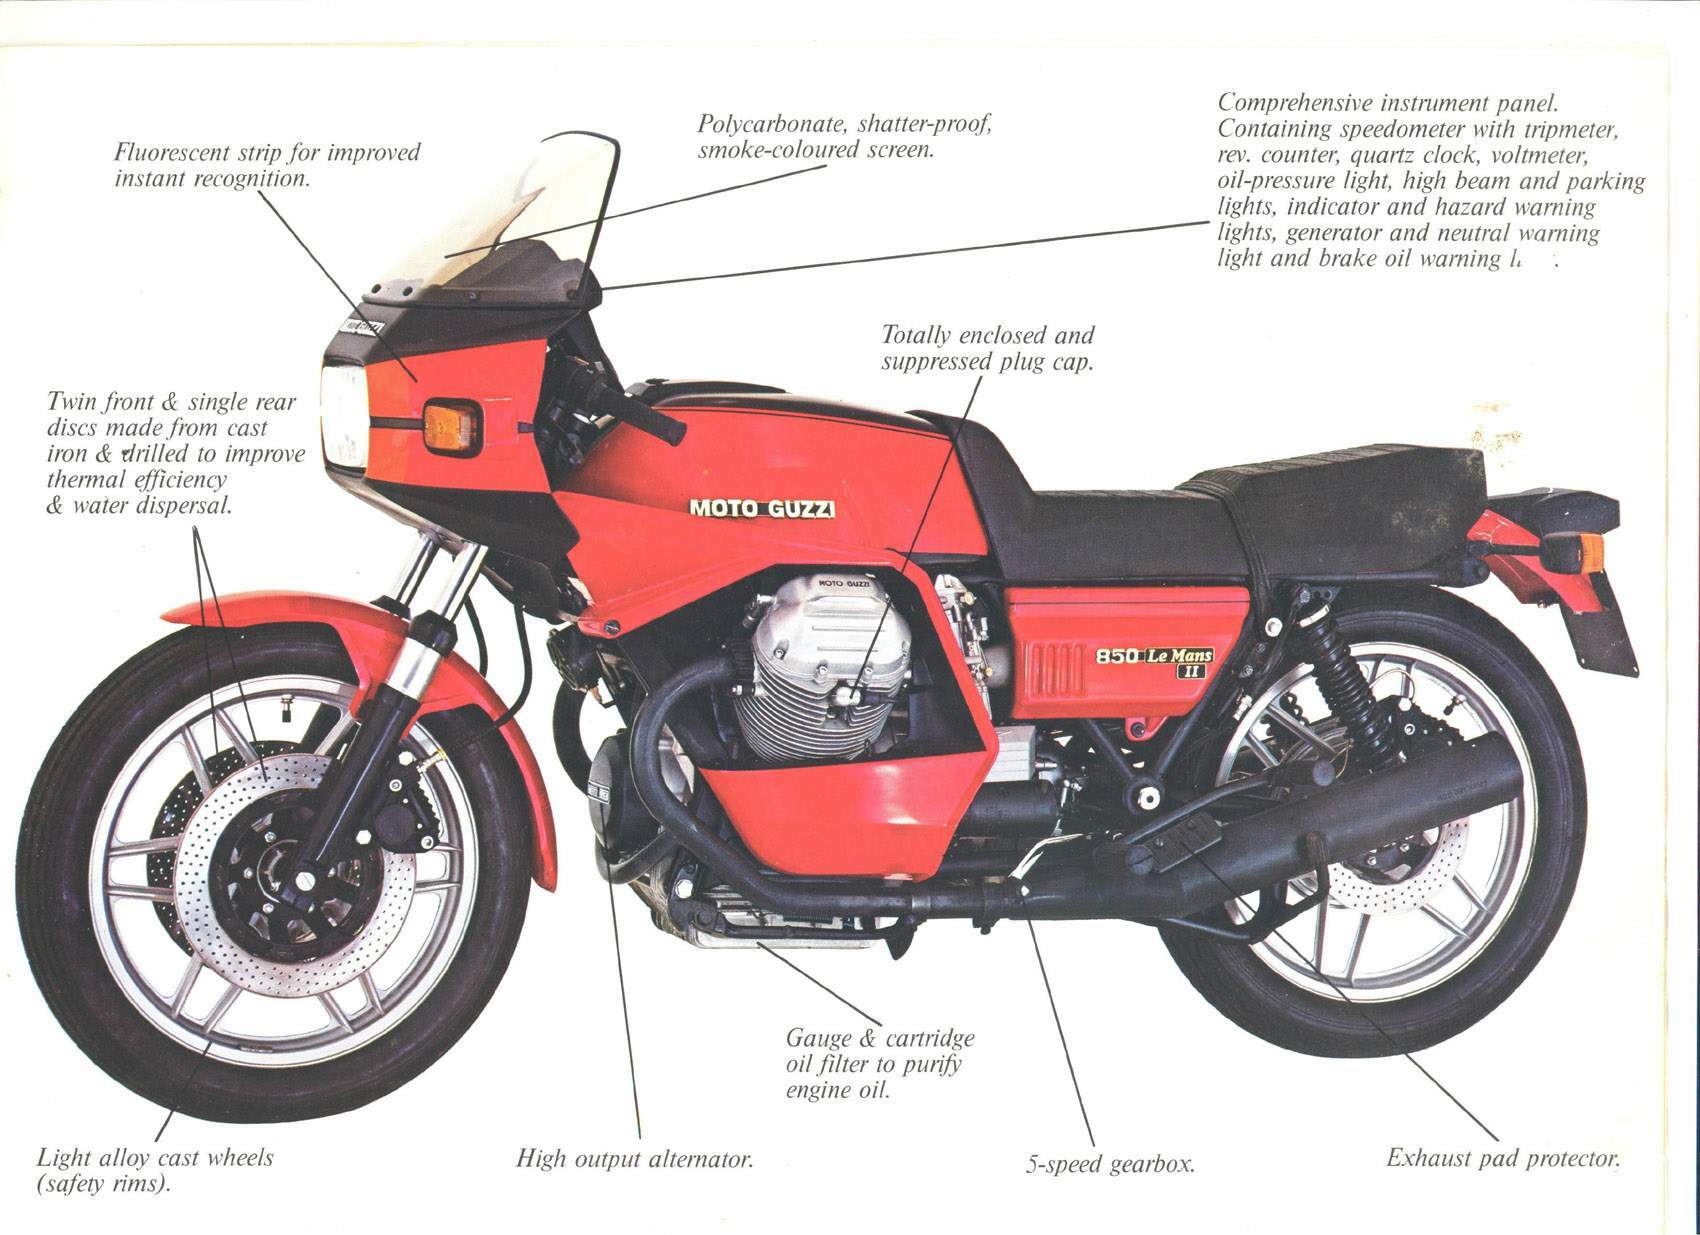 Moto Guzzi 850 Le Mans Mark II For Sale Specifications, Price and Images